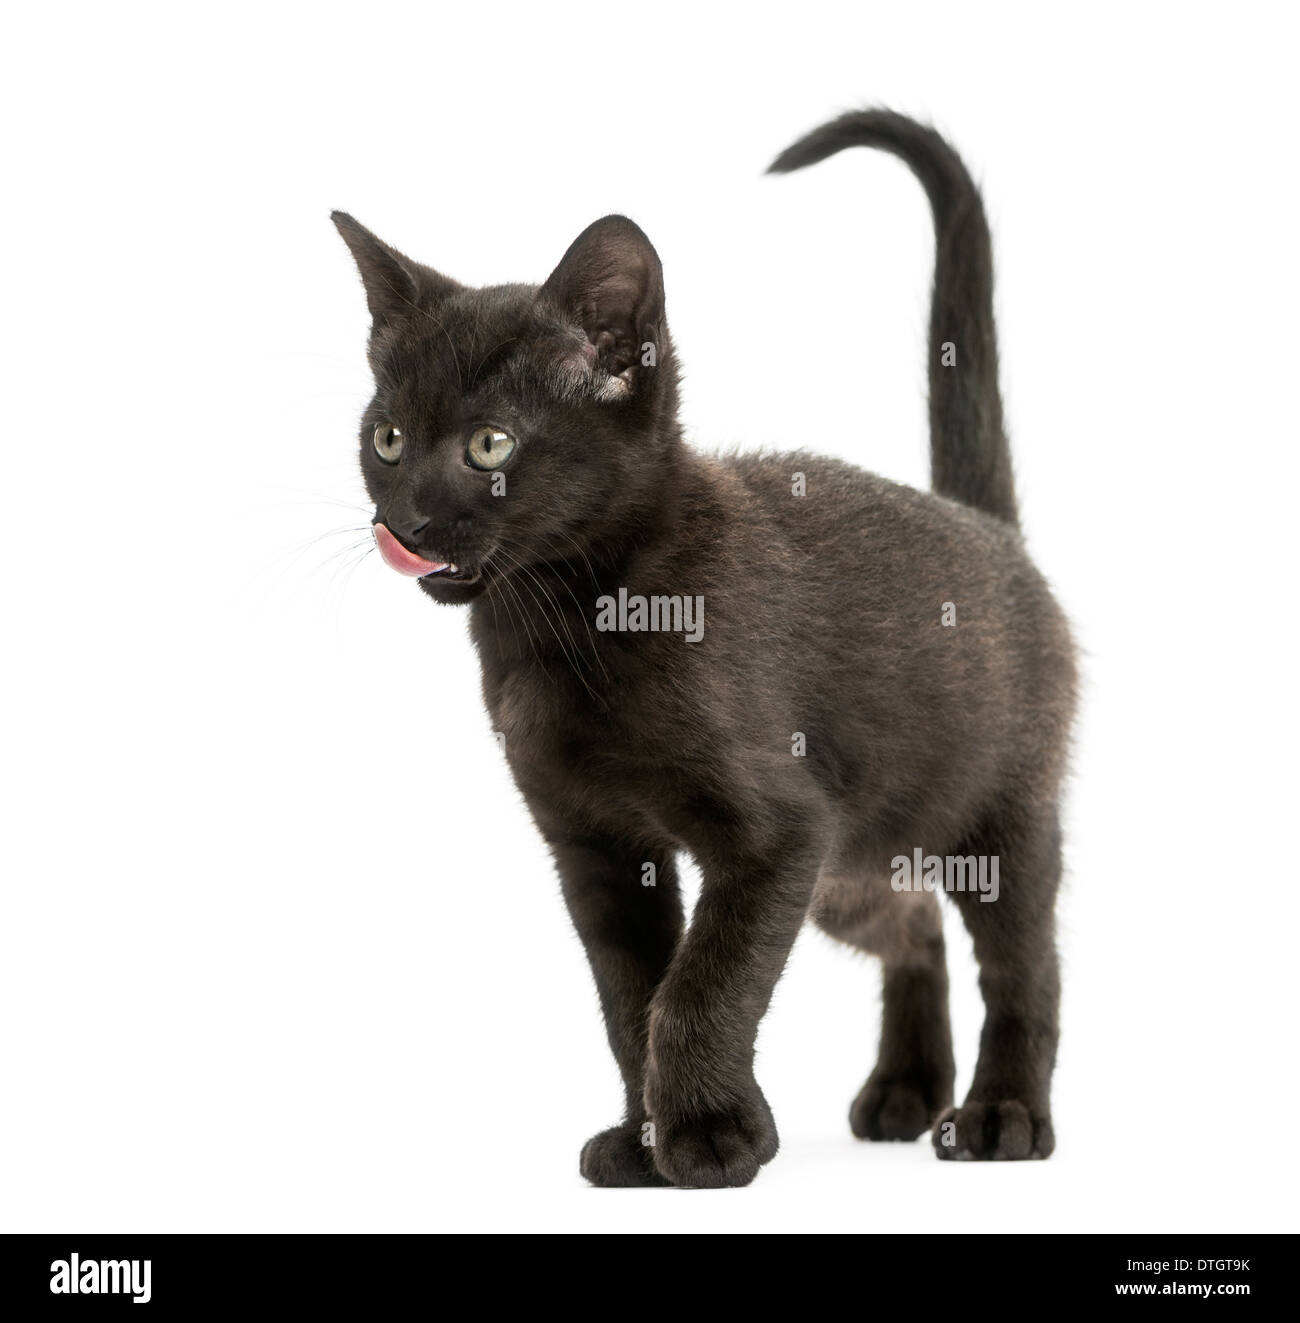 Black kitten licking, standing, 2 months old, against white background Stock Photo